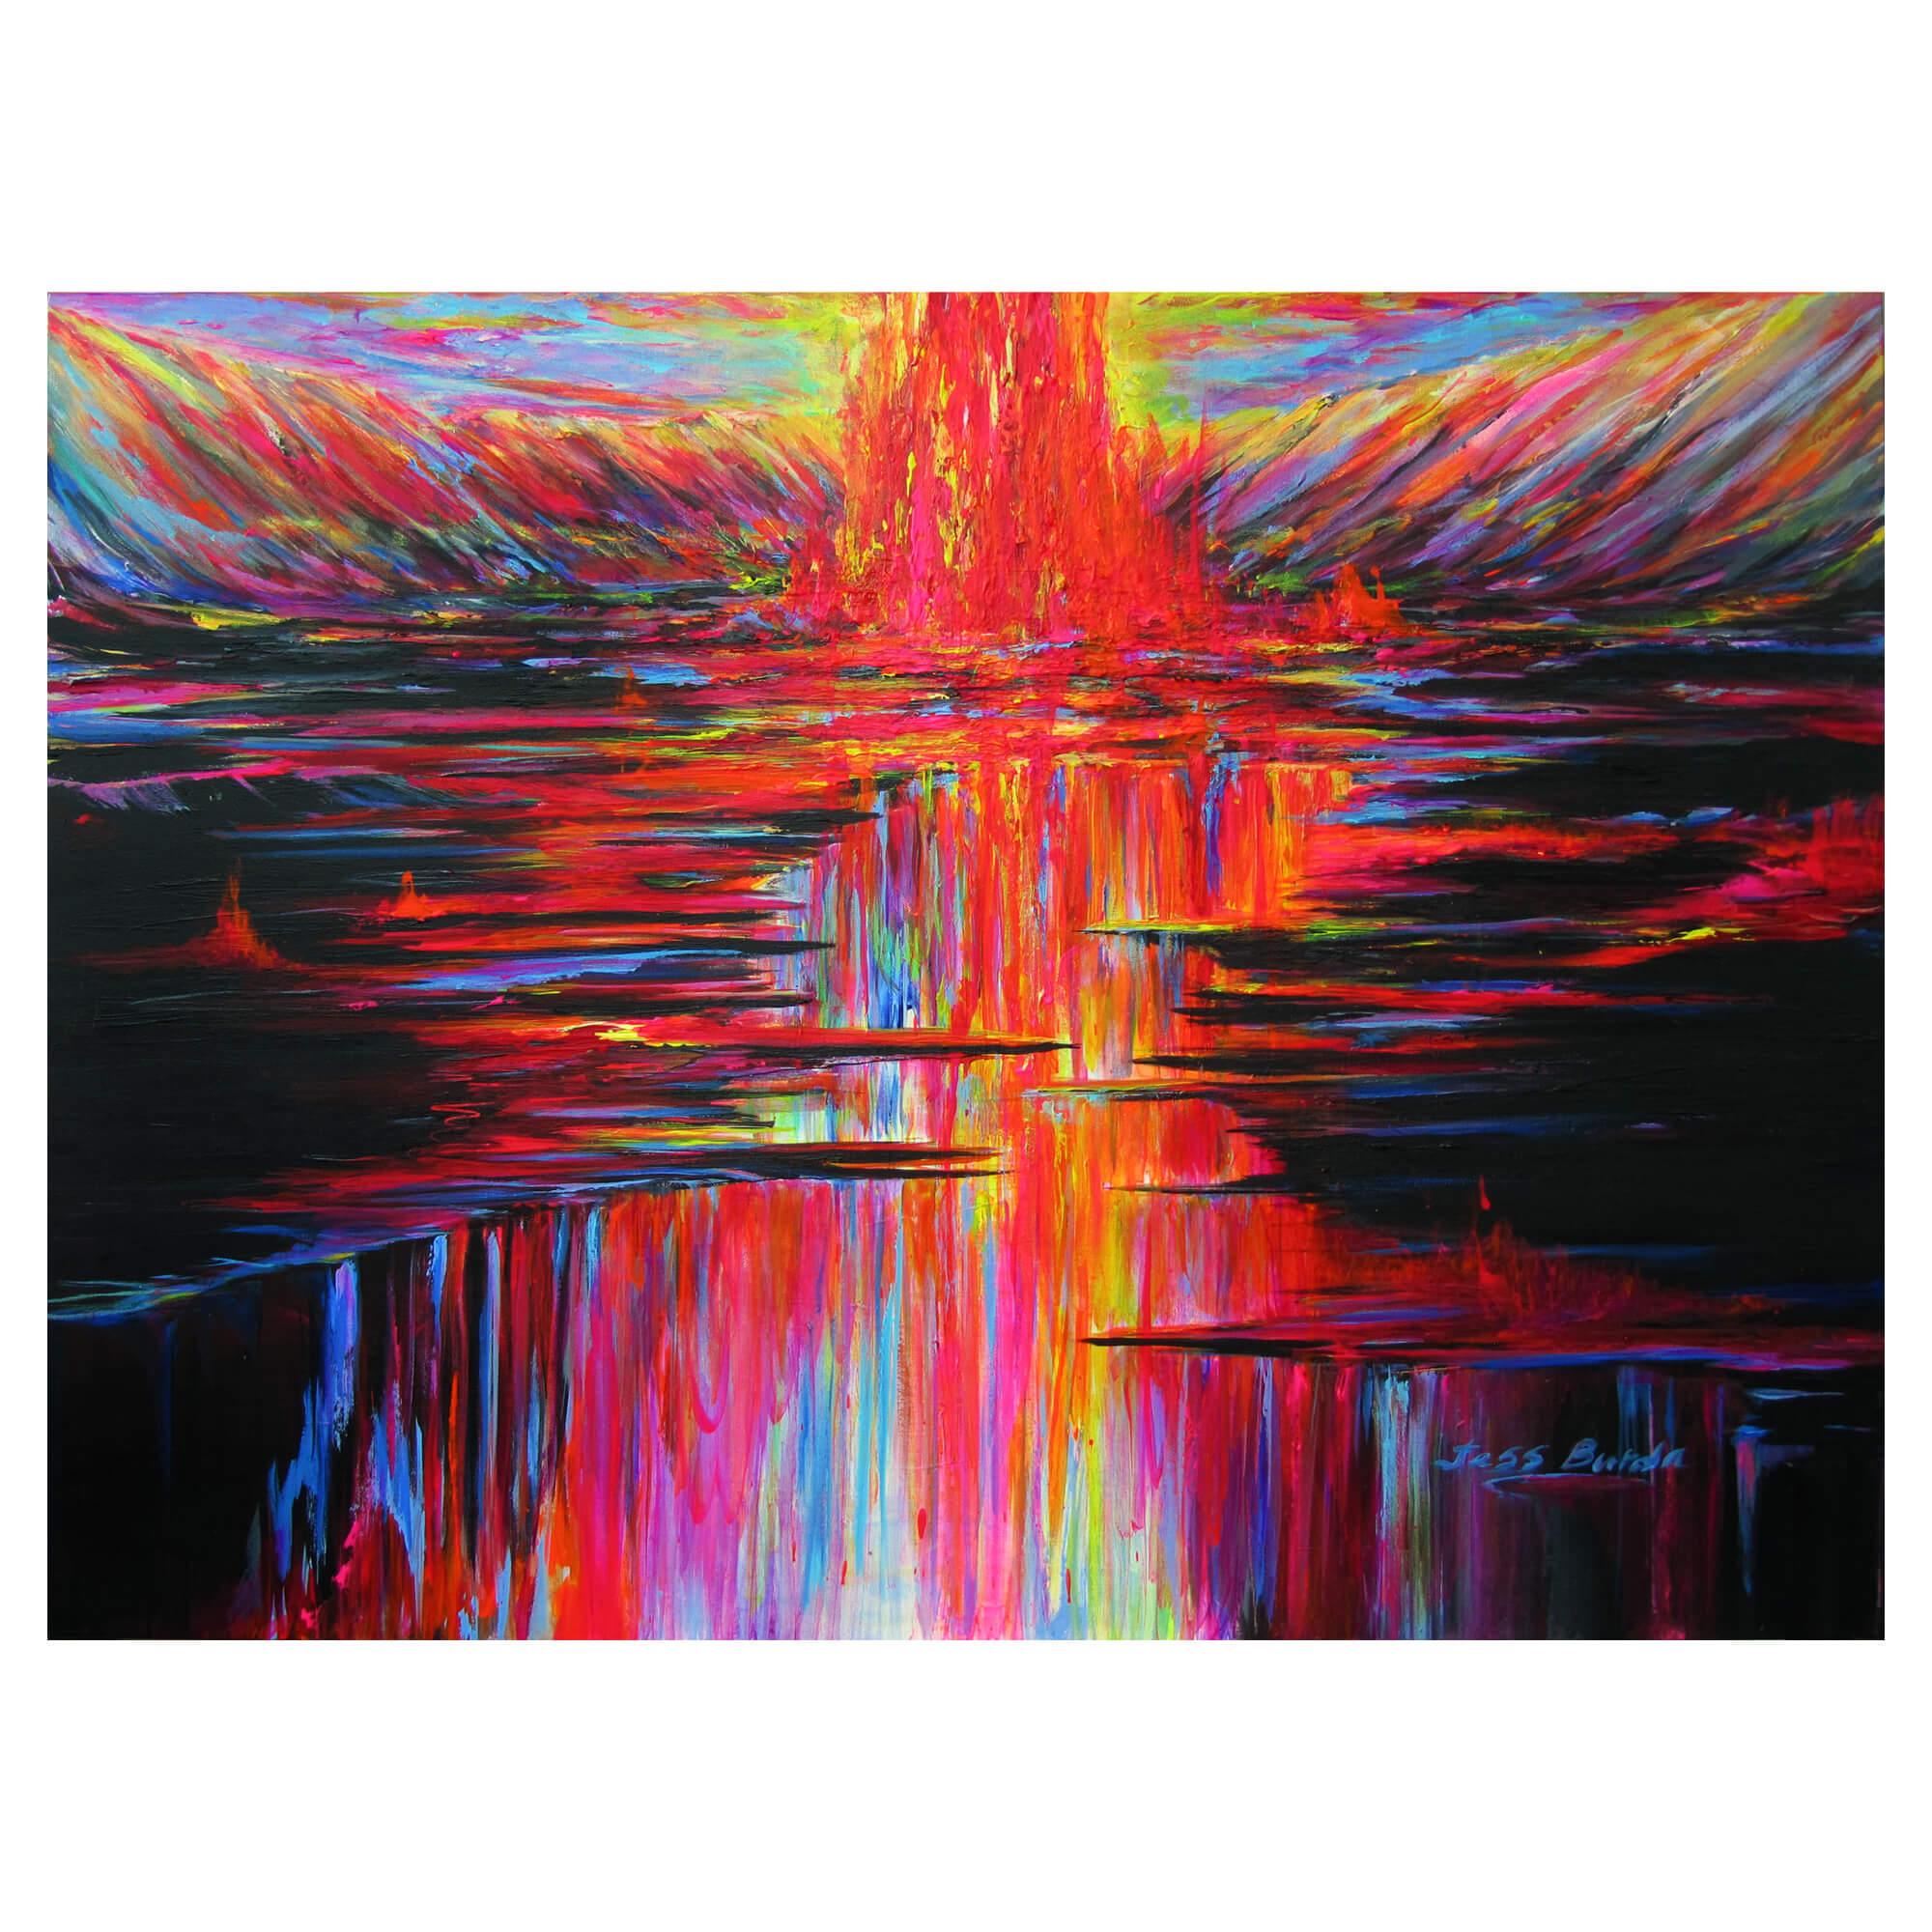 A colorful crater with gushing lava by Hawaii artist Jess Burda